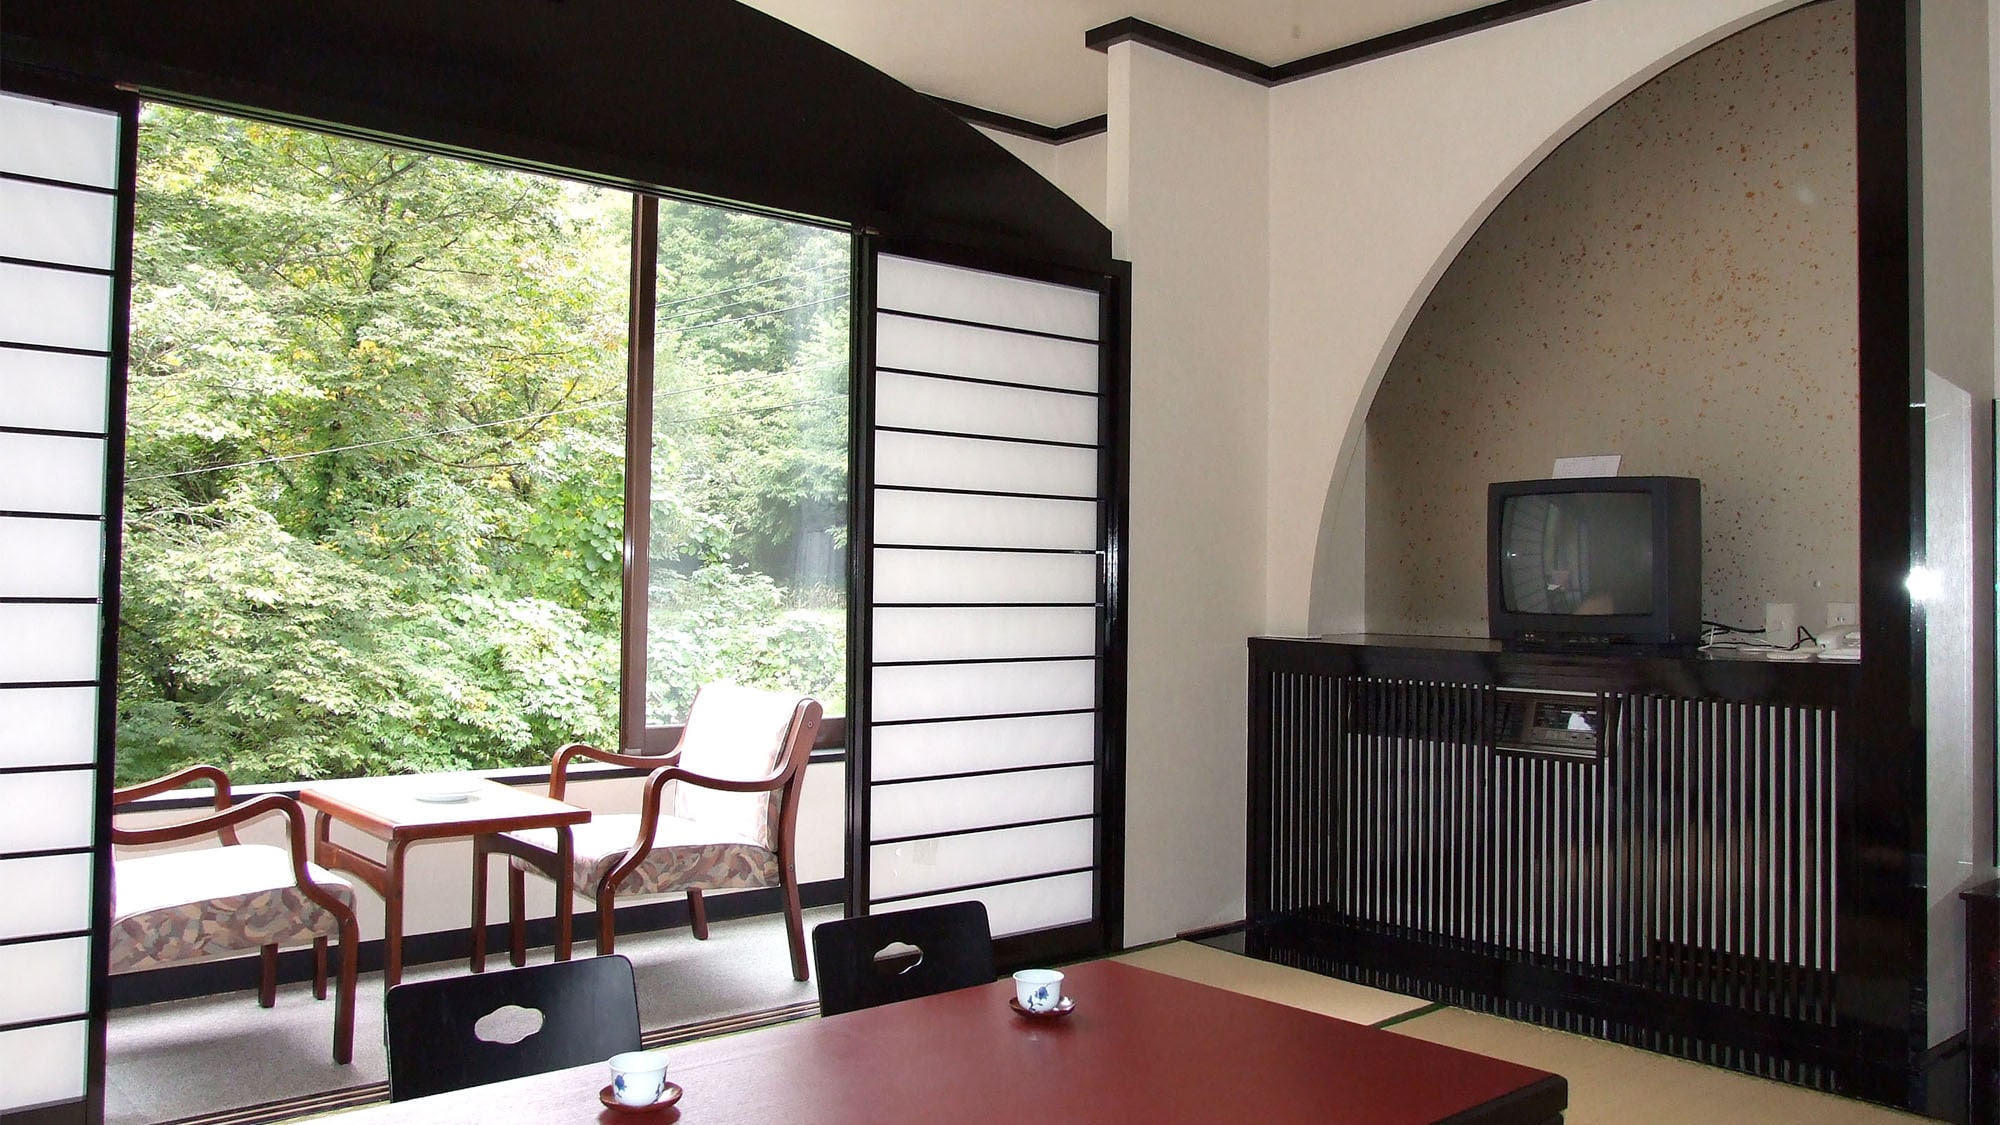 ・ [Example of Japanese-style room] A pure Japanese-style room with a black-painted column that creates a modern atmosphere.